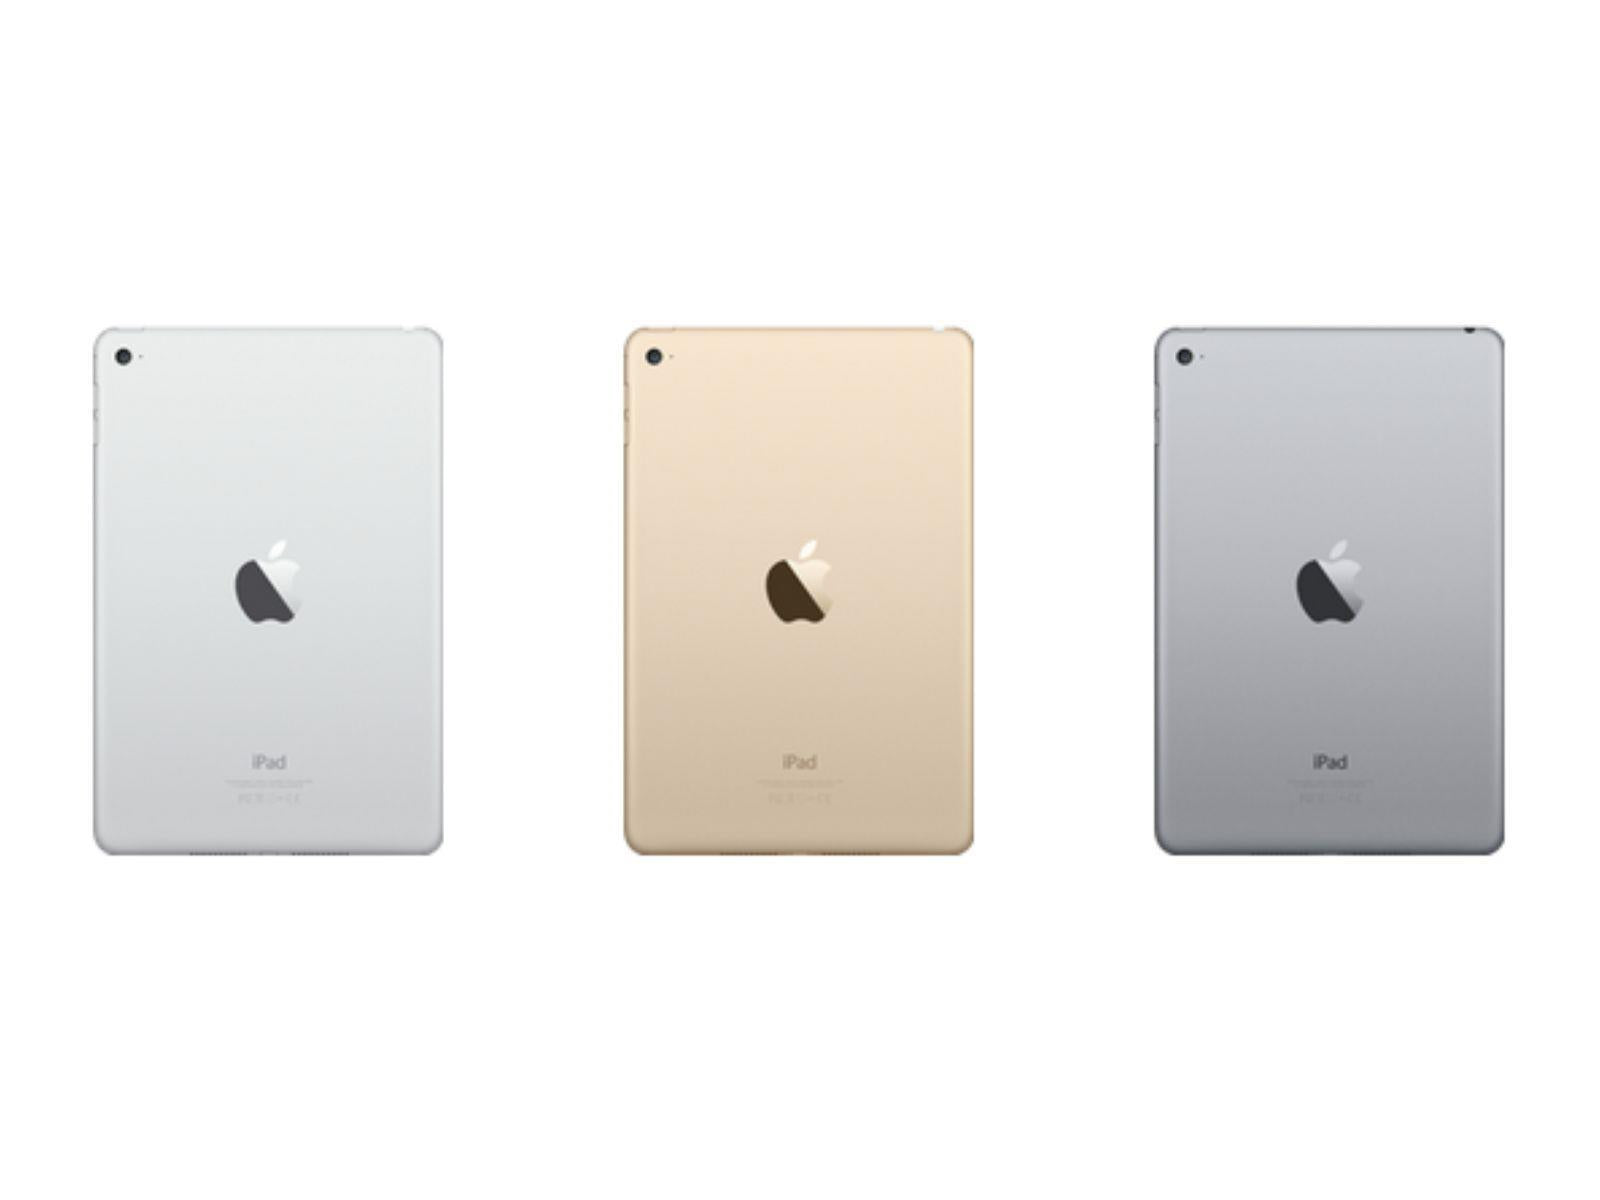 iPad Mini 4th Gen In Colours Silver, Gold And Space Grey Back